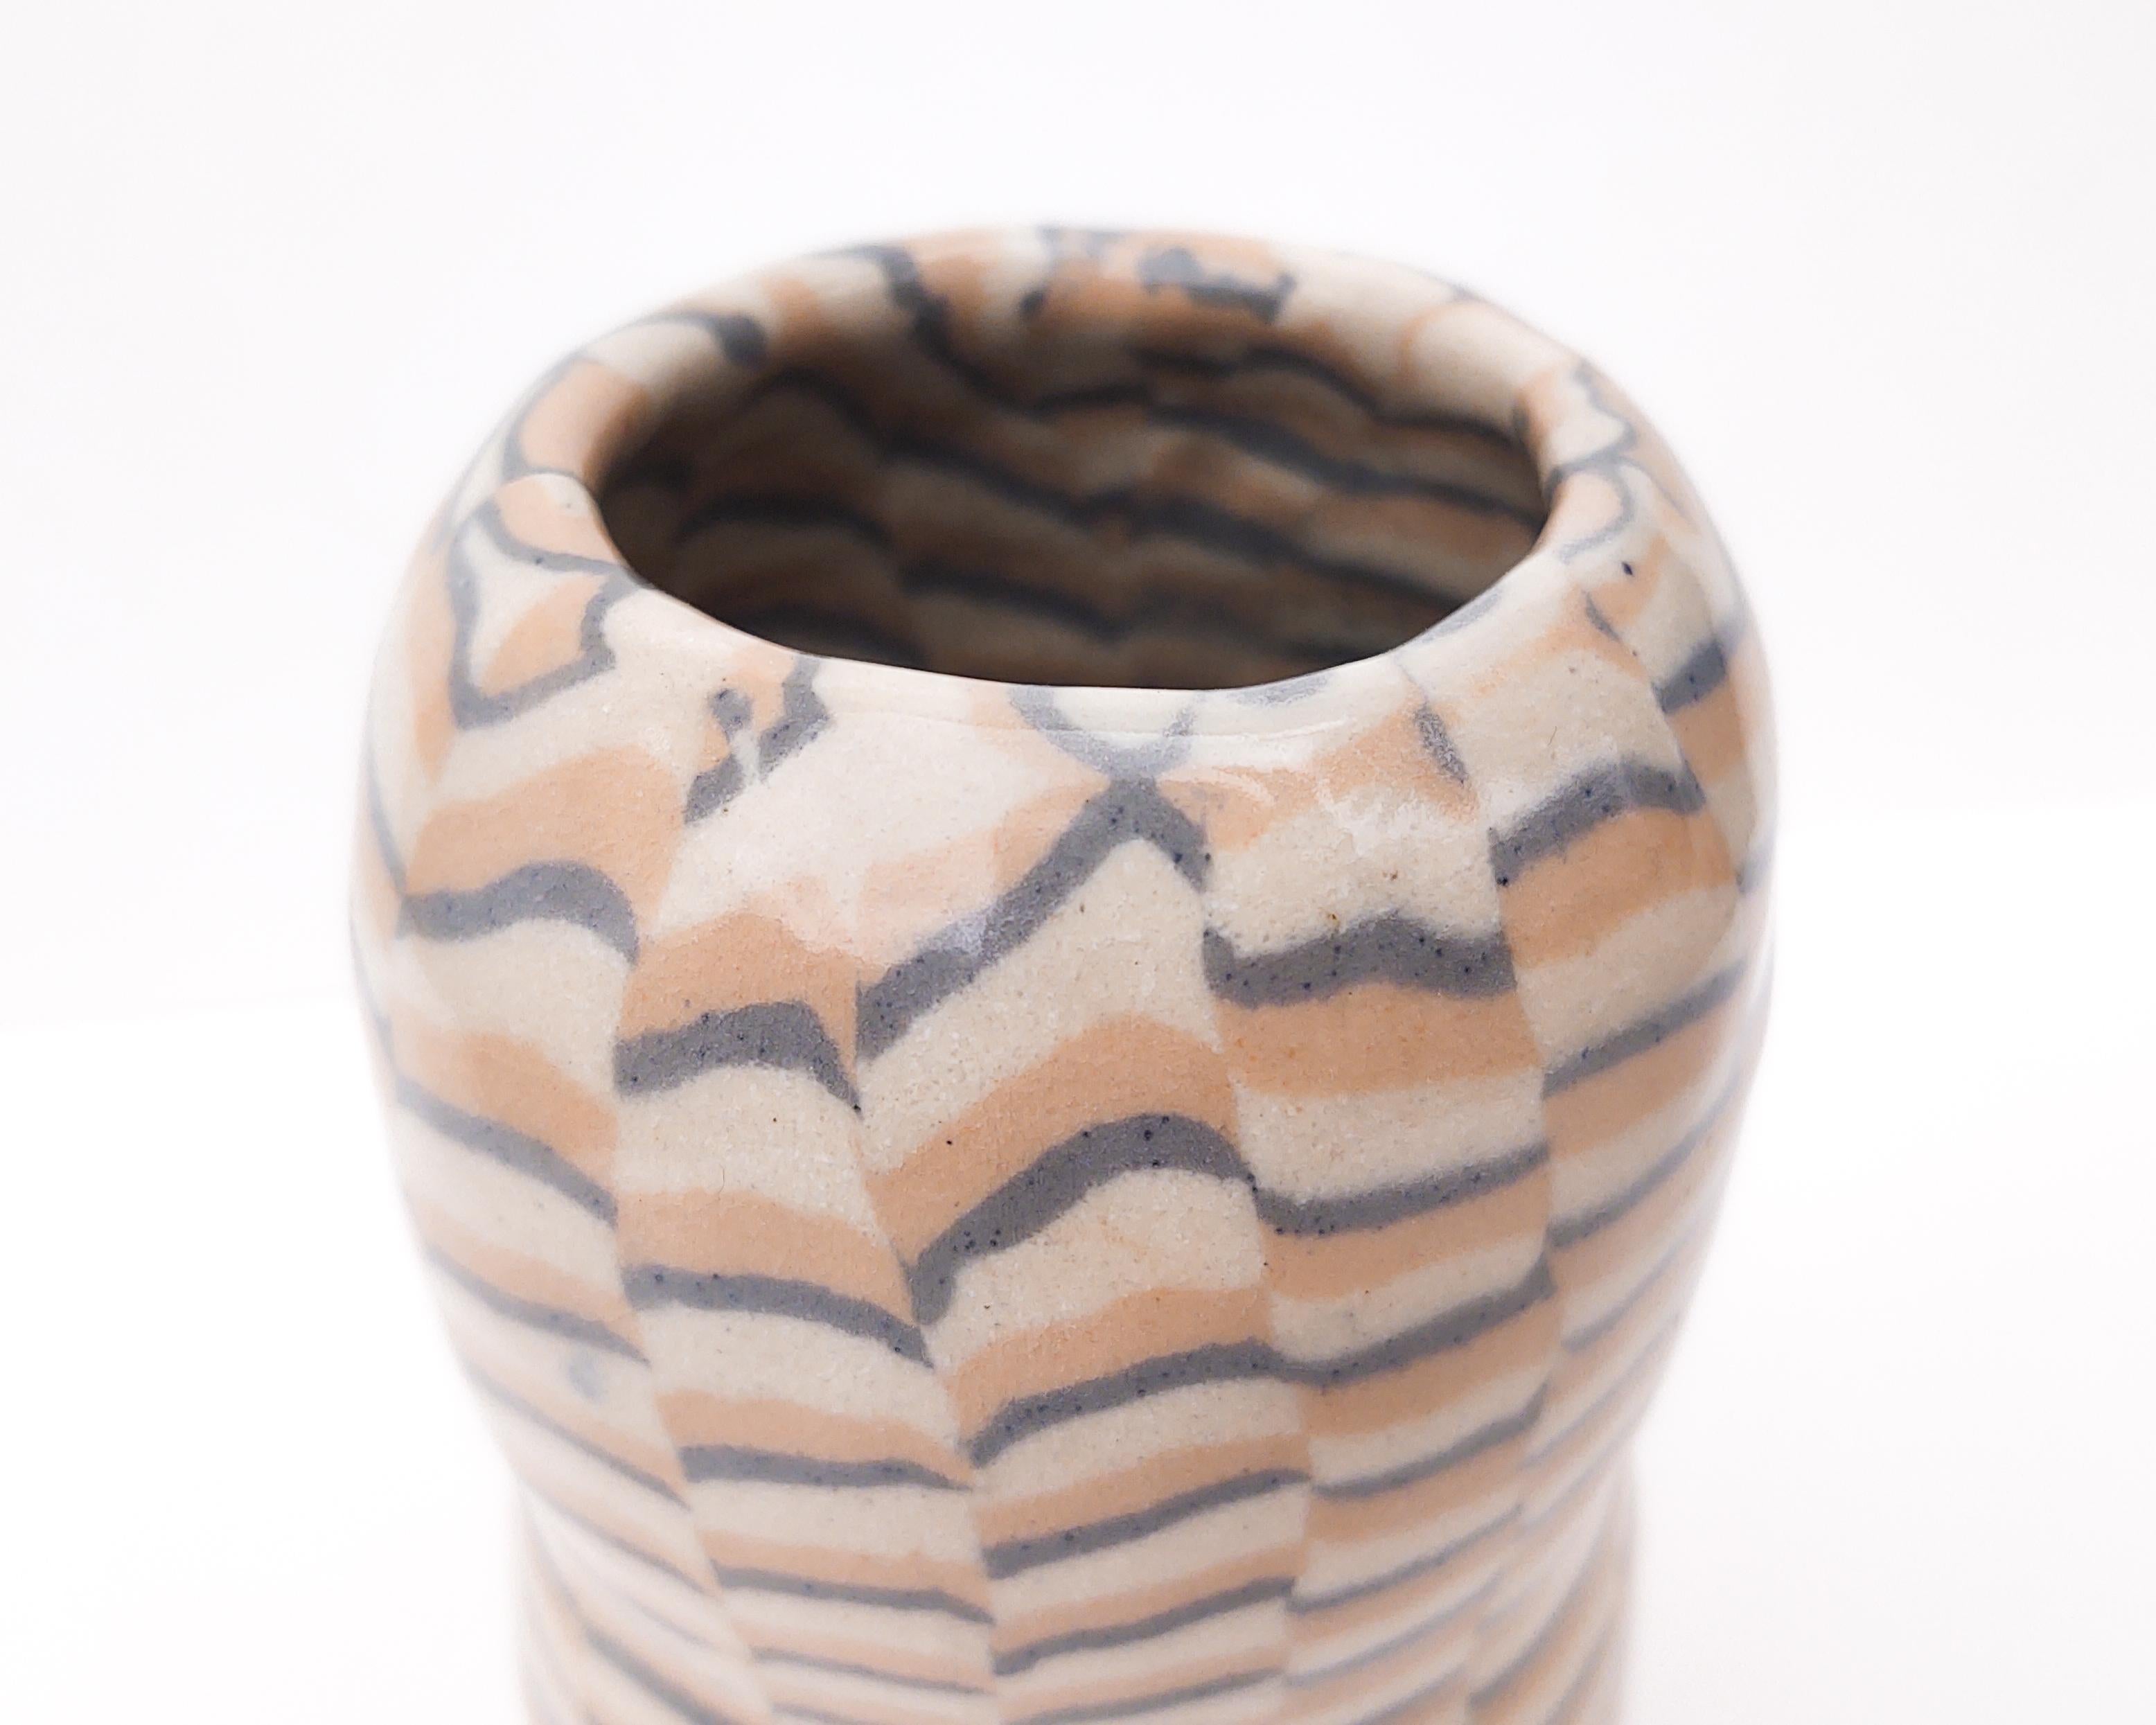 American Handmade Nerikomi Three Color Abstract 'Peanut' Vase by Fizzy Ceramics For Sale